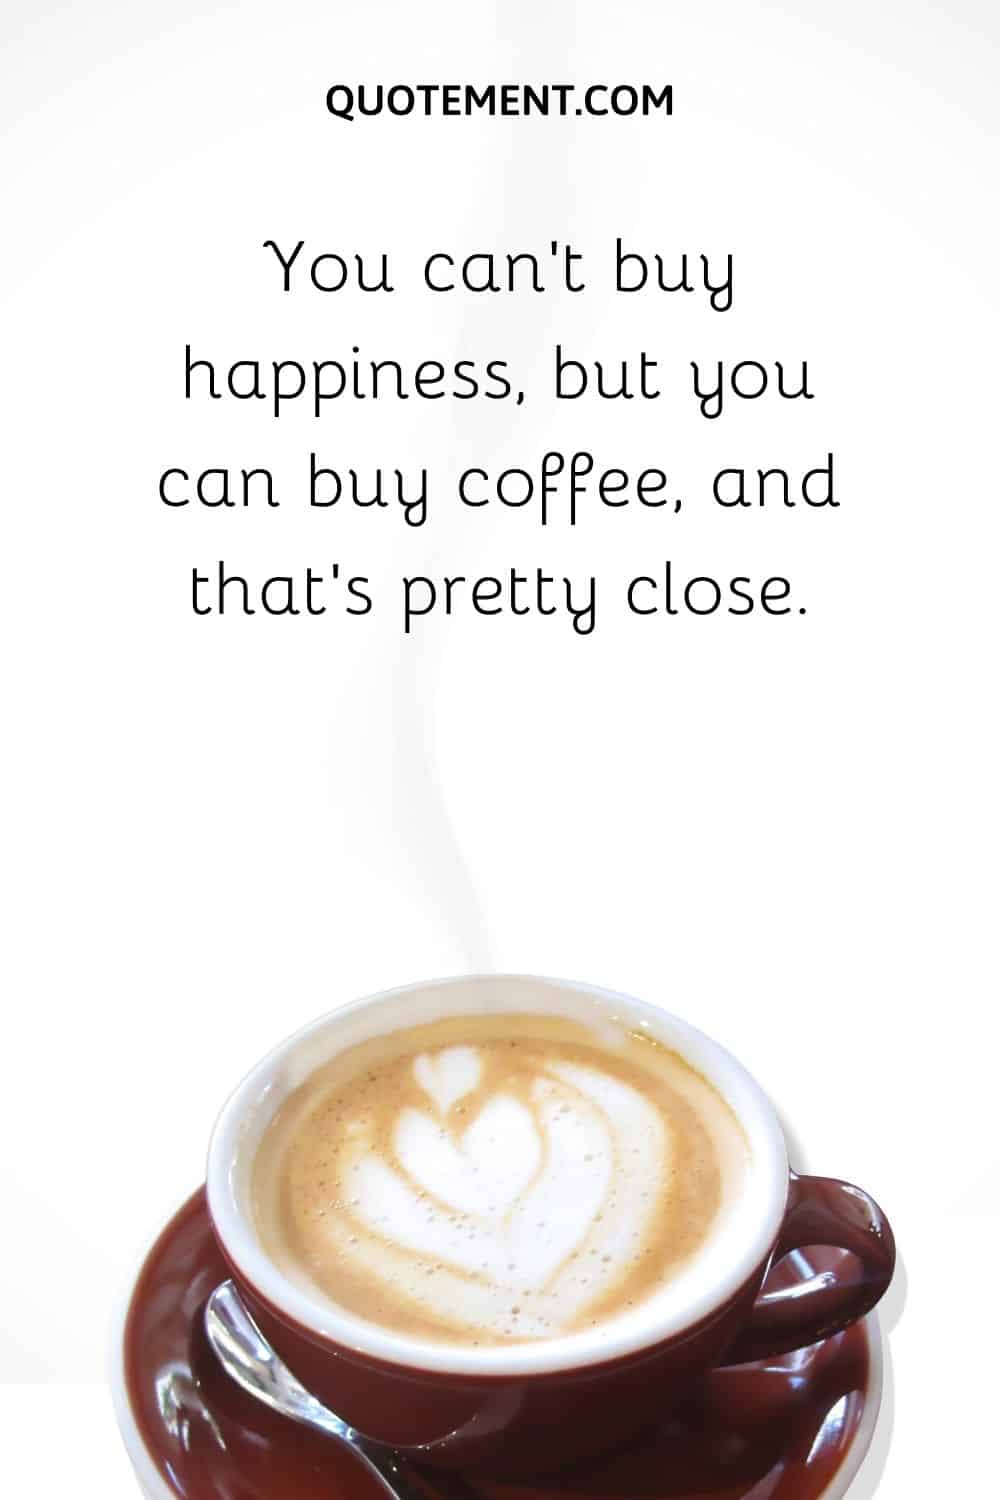 You can’t buy happiness, but you can buy coffee, and that’s pretty close